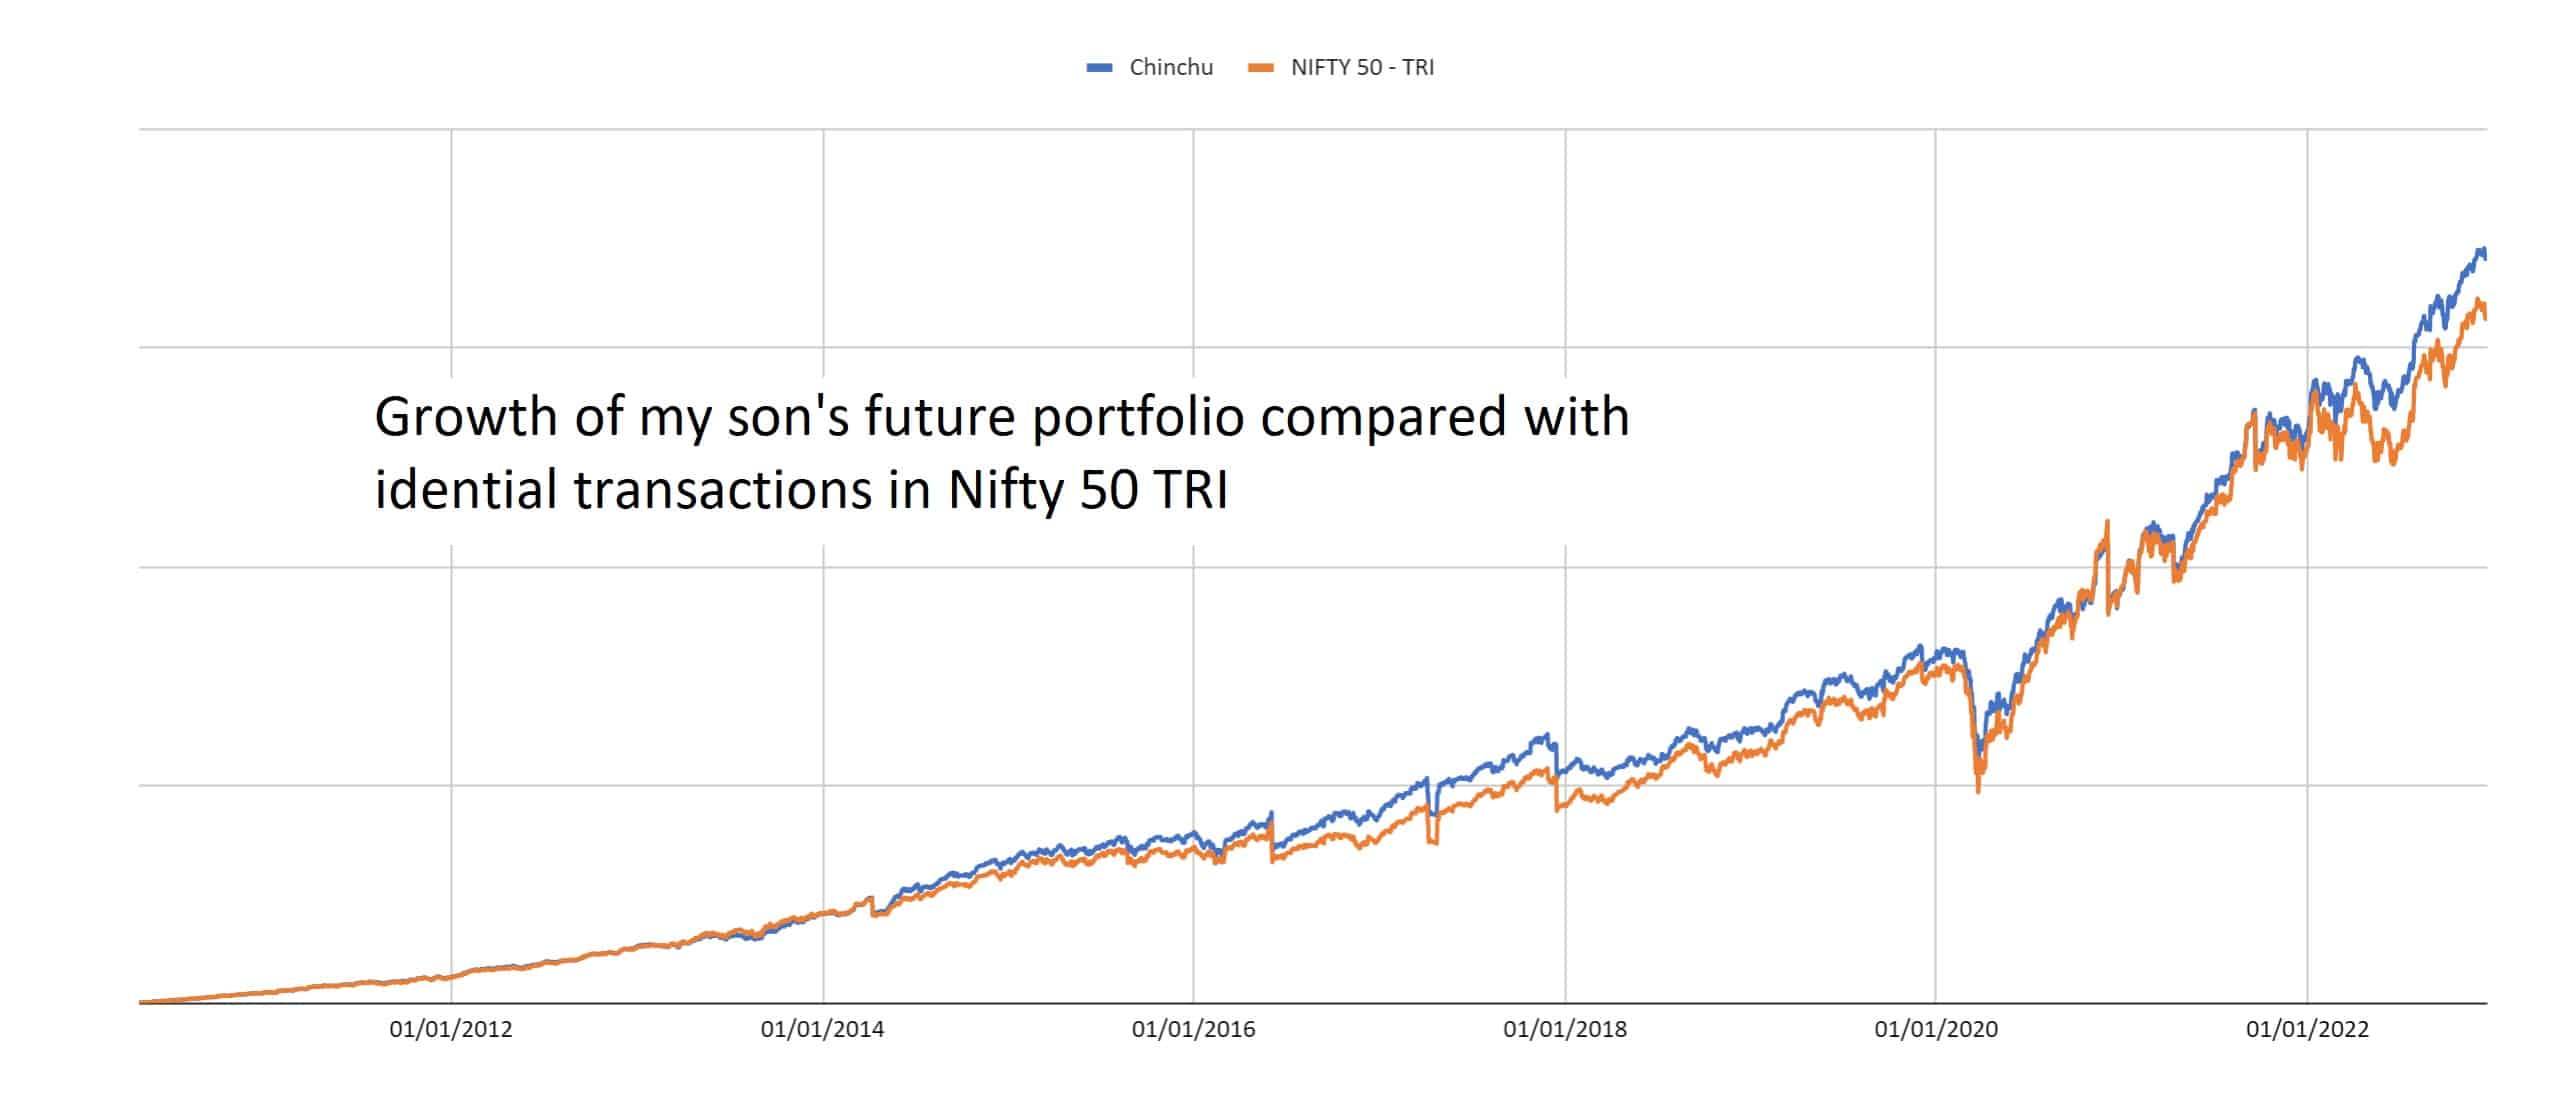 Growth of my son's future portfolio compared with identical transactions in Nifty 50 TRI